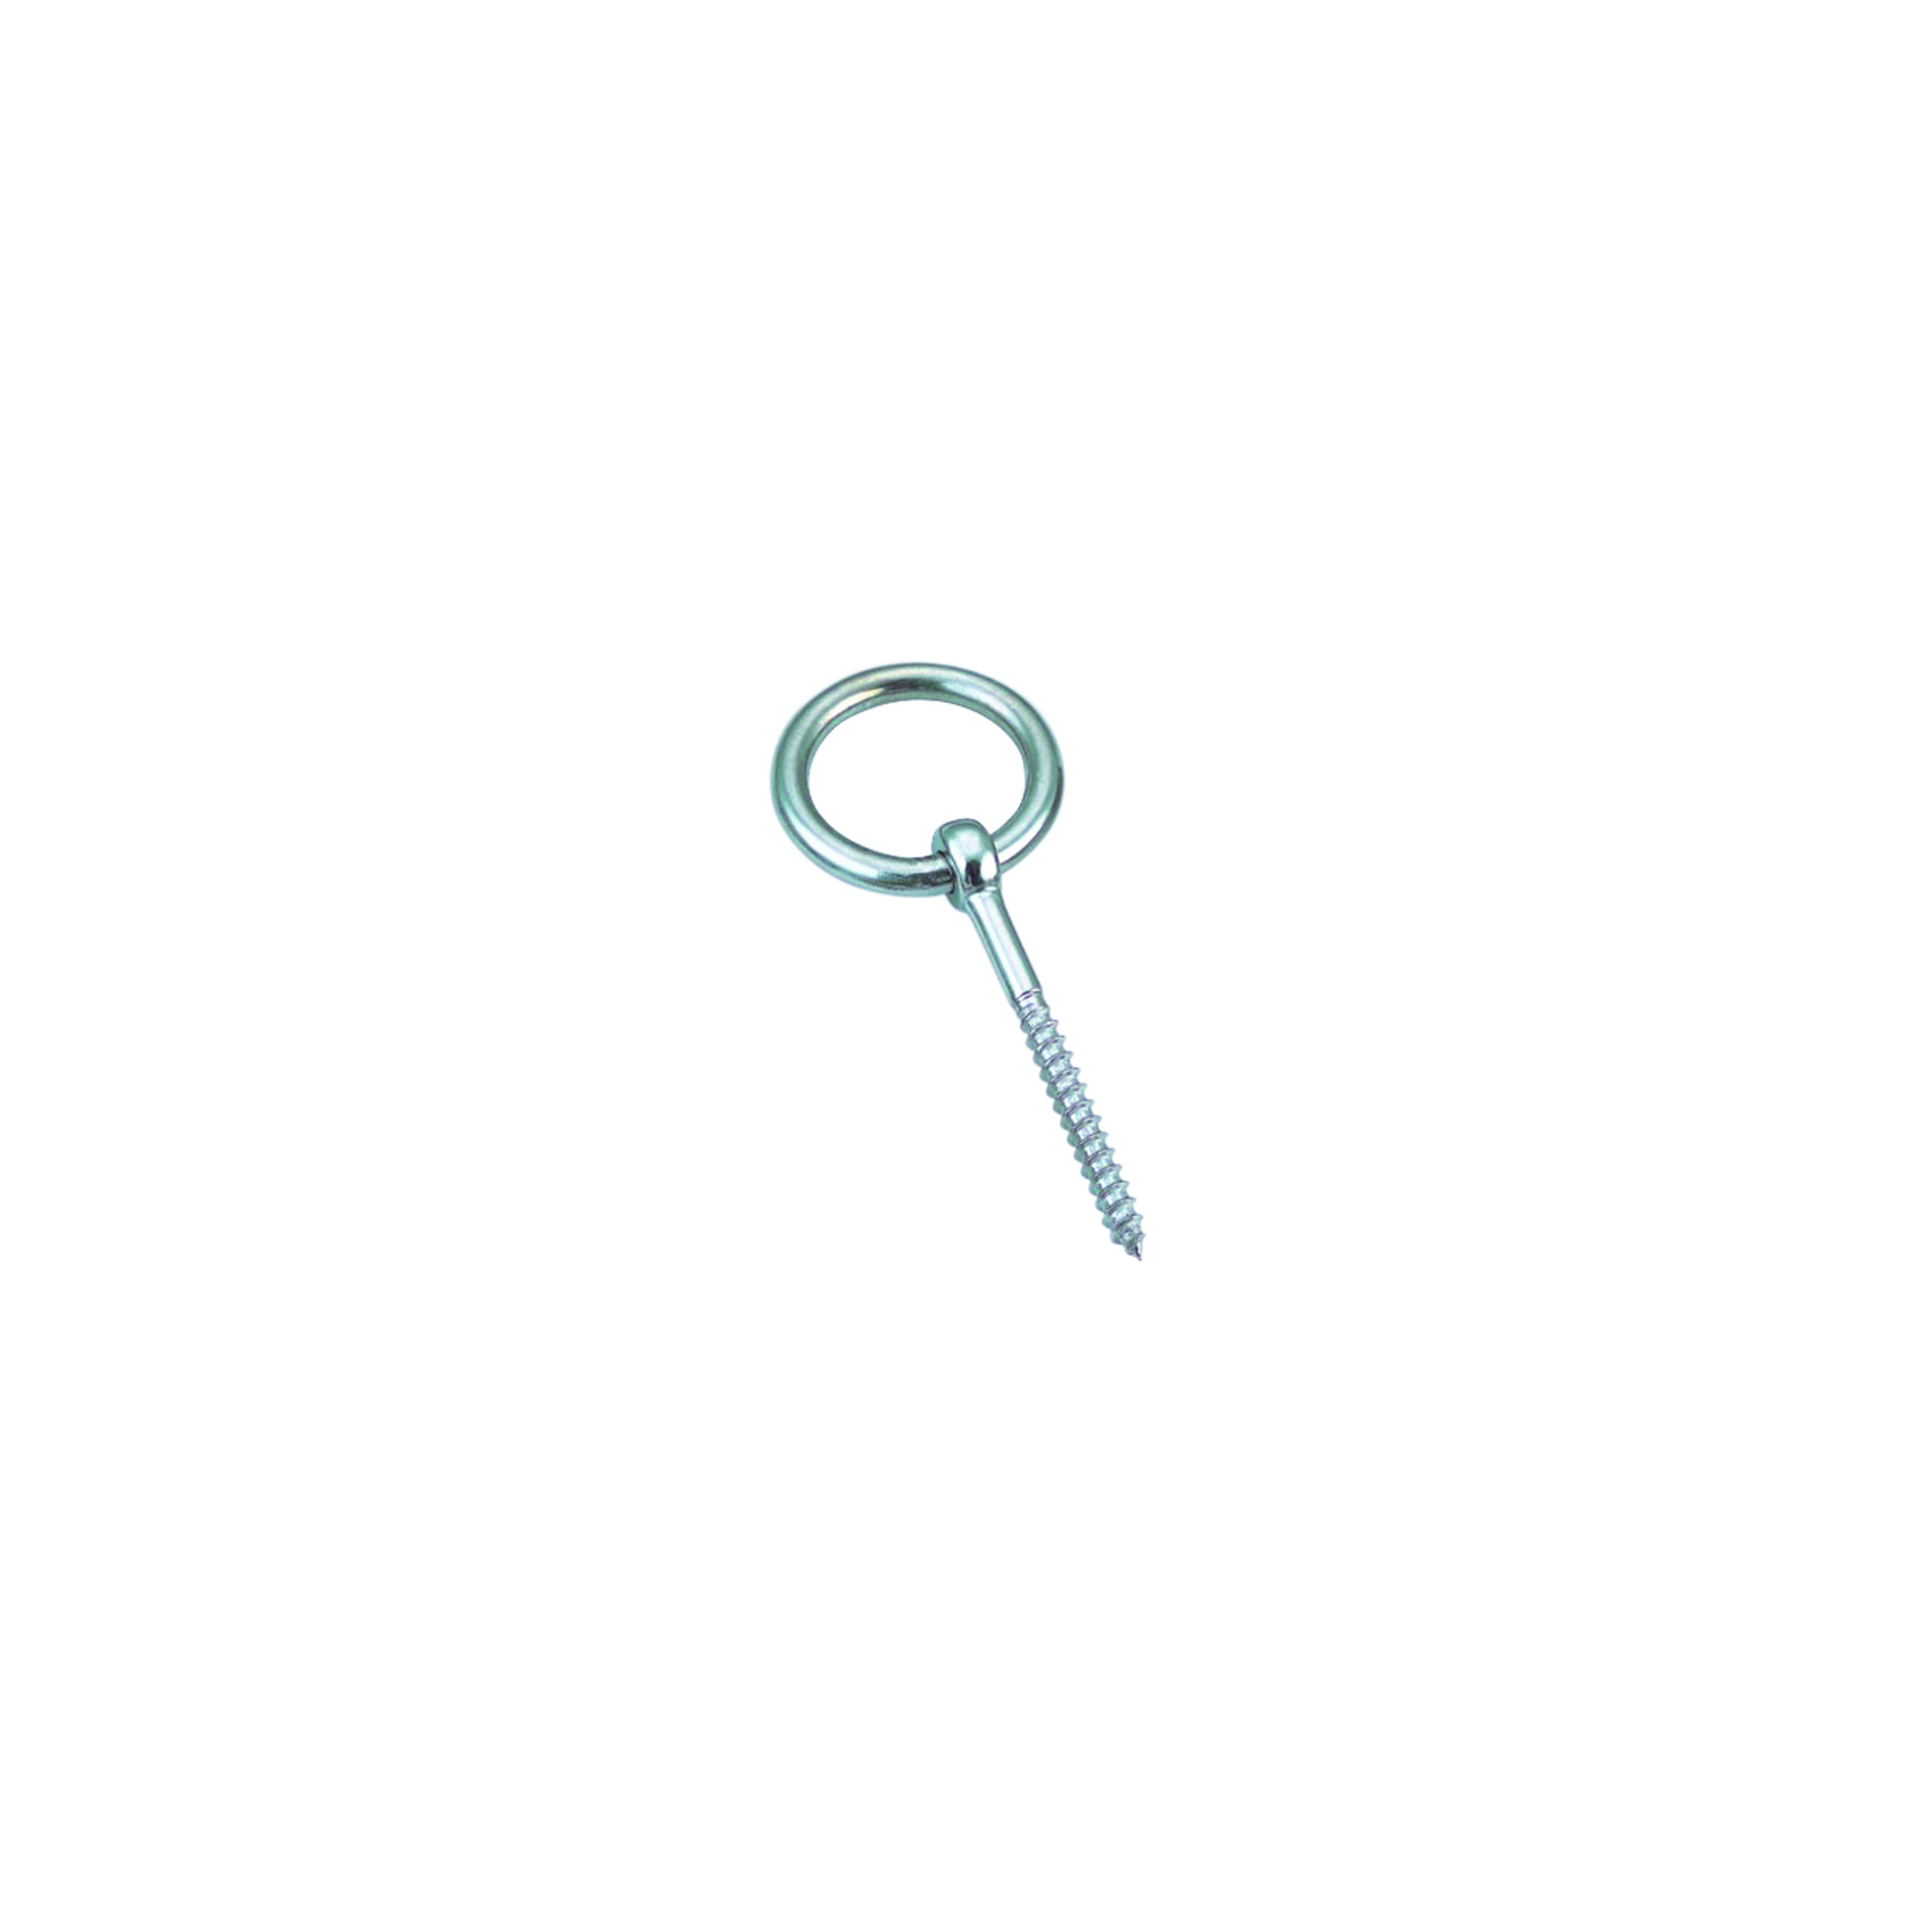 Eyebolt with wood thread and ring A4  bolt 12x120mm, ring 12x75mm